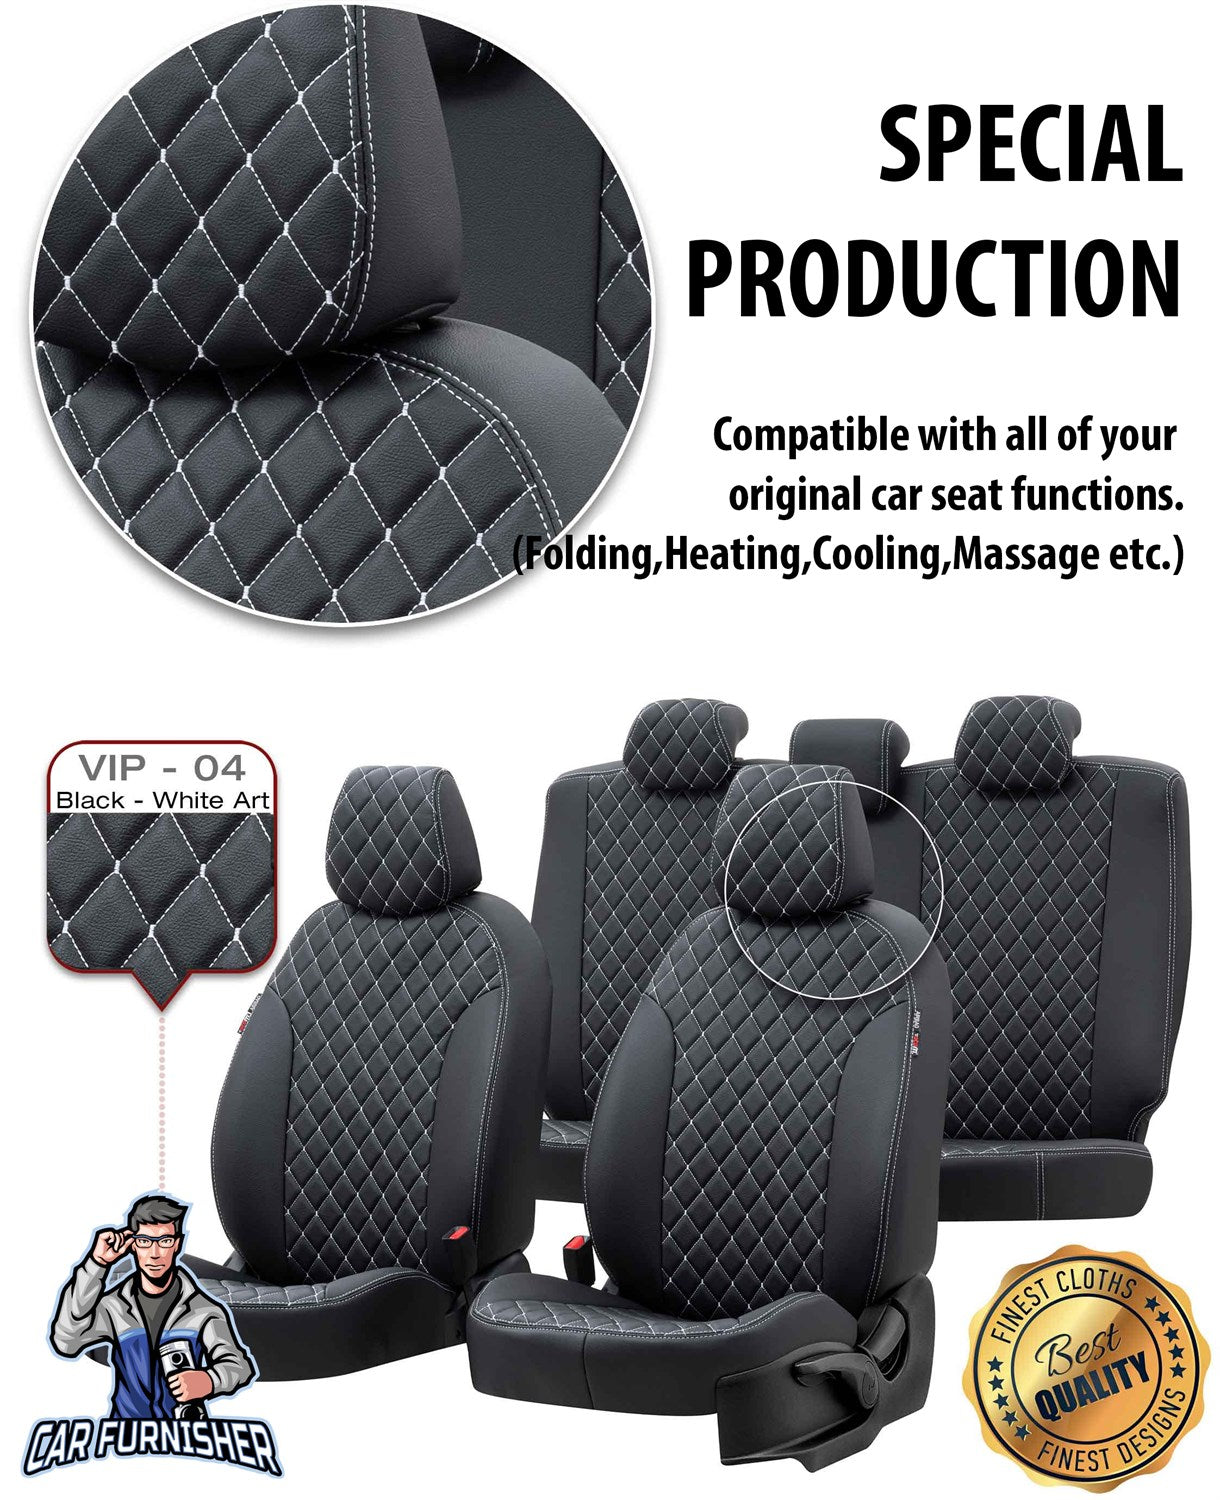 Porsche Cayenne Seat Covers Madrid Leather Design Smoked Leather